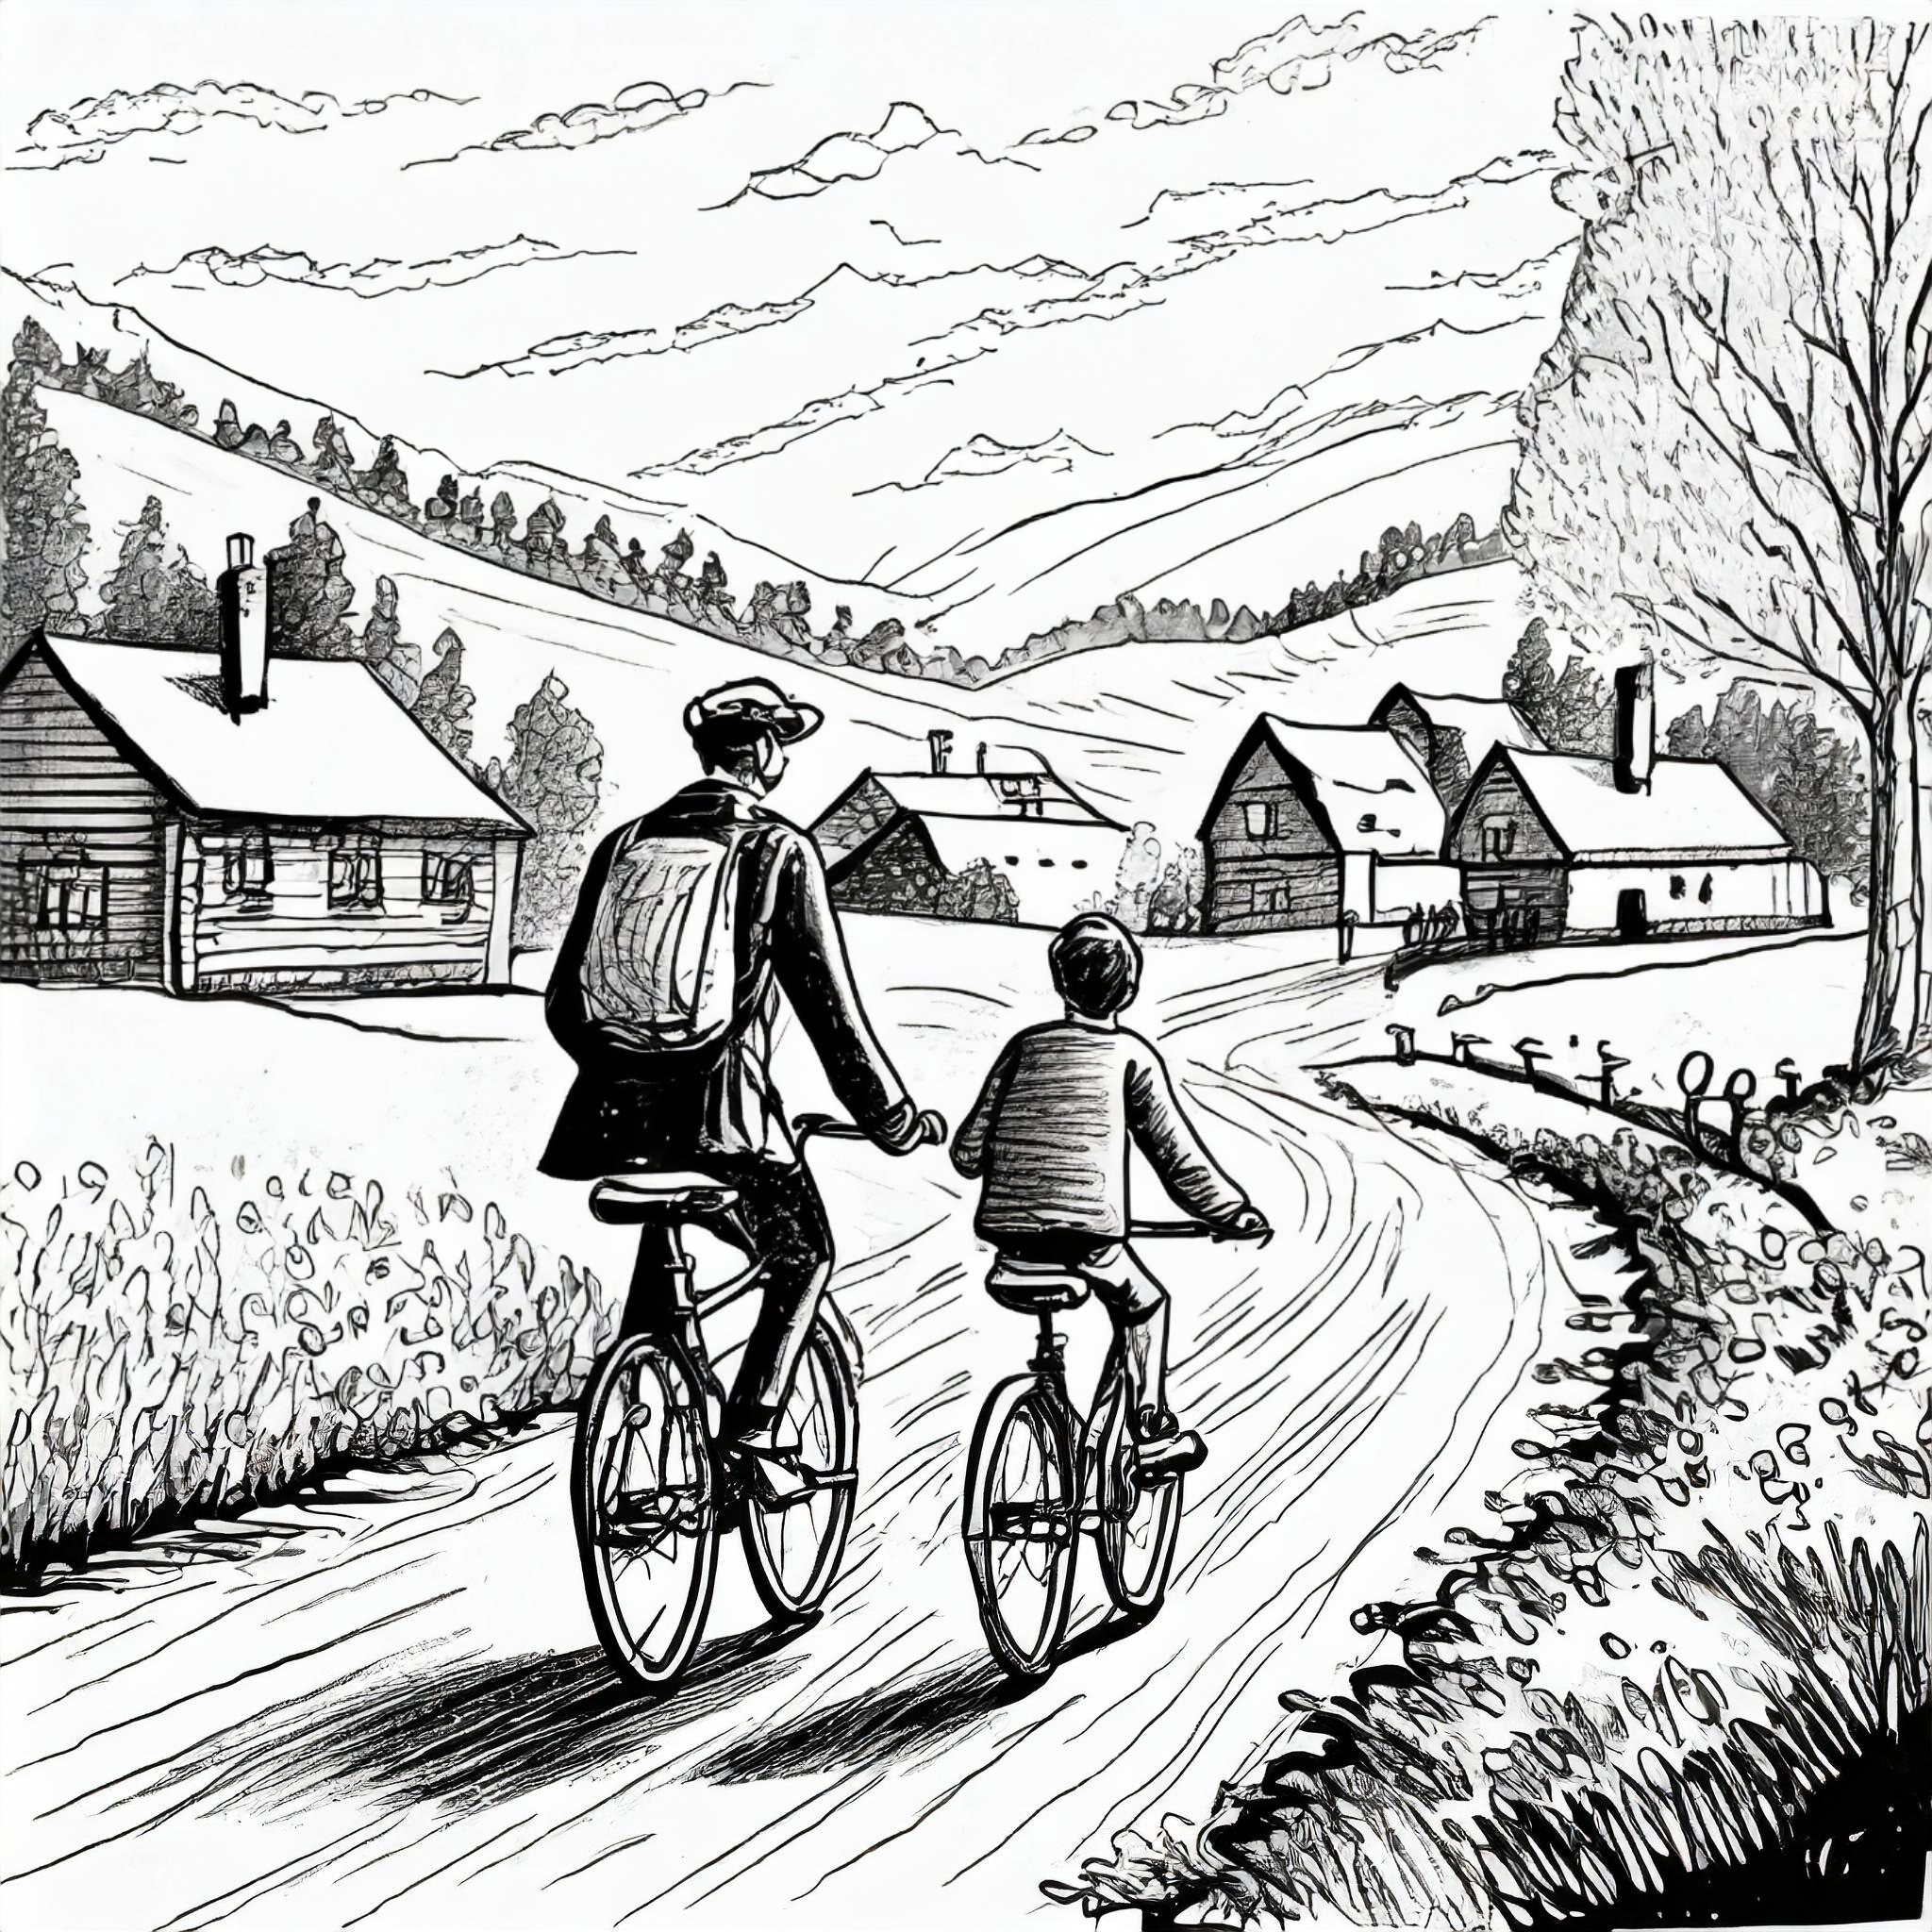 in 1945, in a tiny German village, a father and his thirteen-year-old son knocked on the gate of a farmhouse for an awfully long time, without being opened / In 1945, a father and his thirteen-year-old son ride their bicycles through a village.